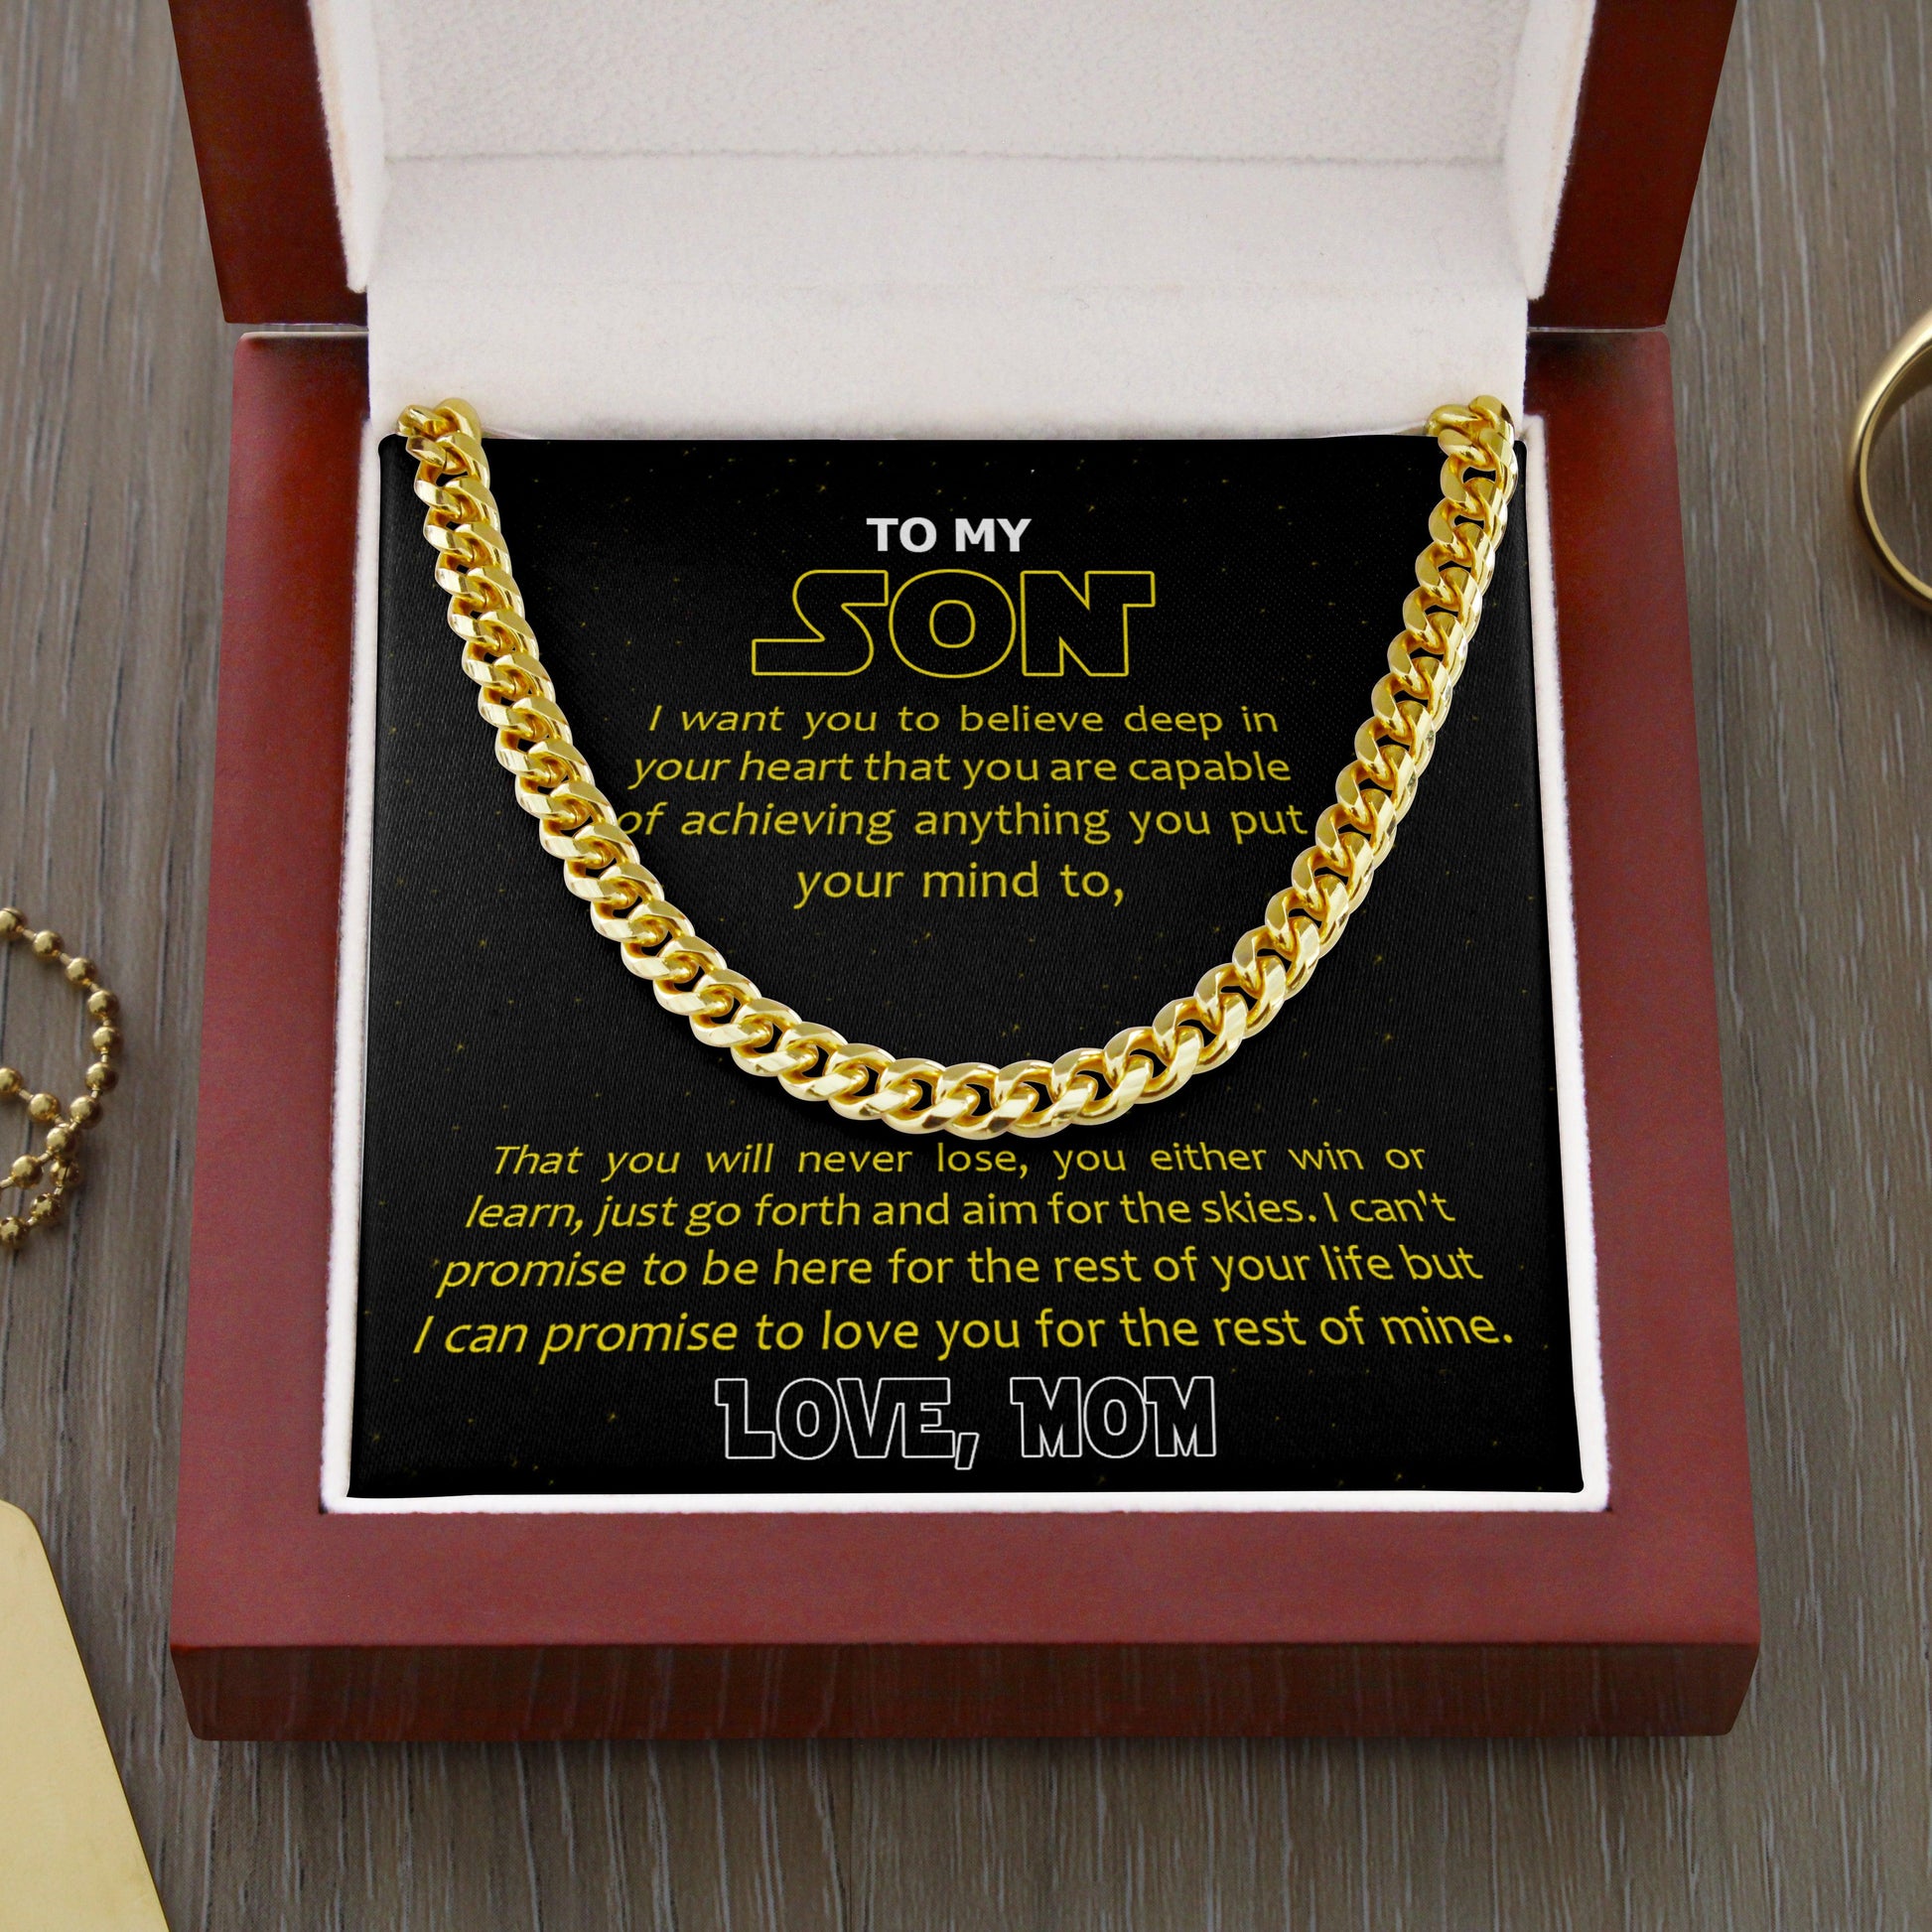 Jewelry gifts Son - Sky Limit - Cuban Link Chain - Belesmé - Memorable Jewelry Gifts 